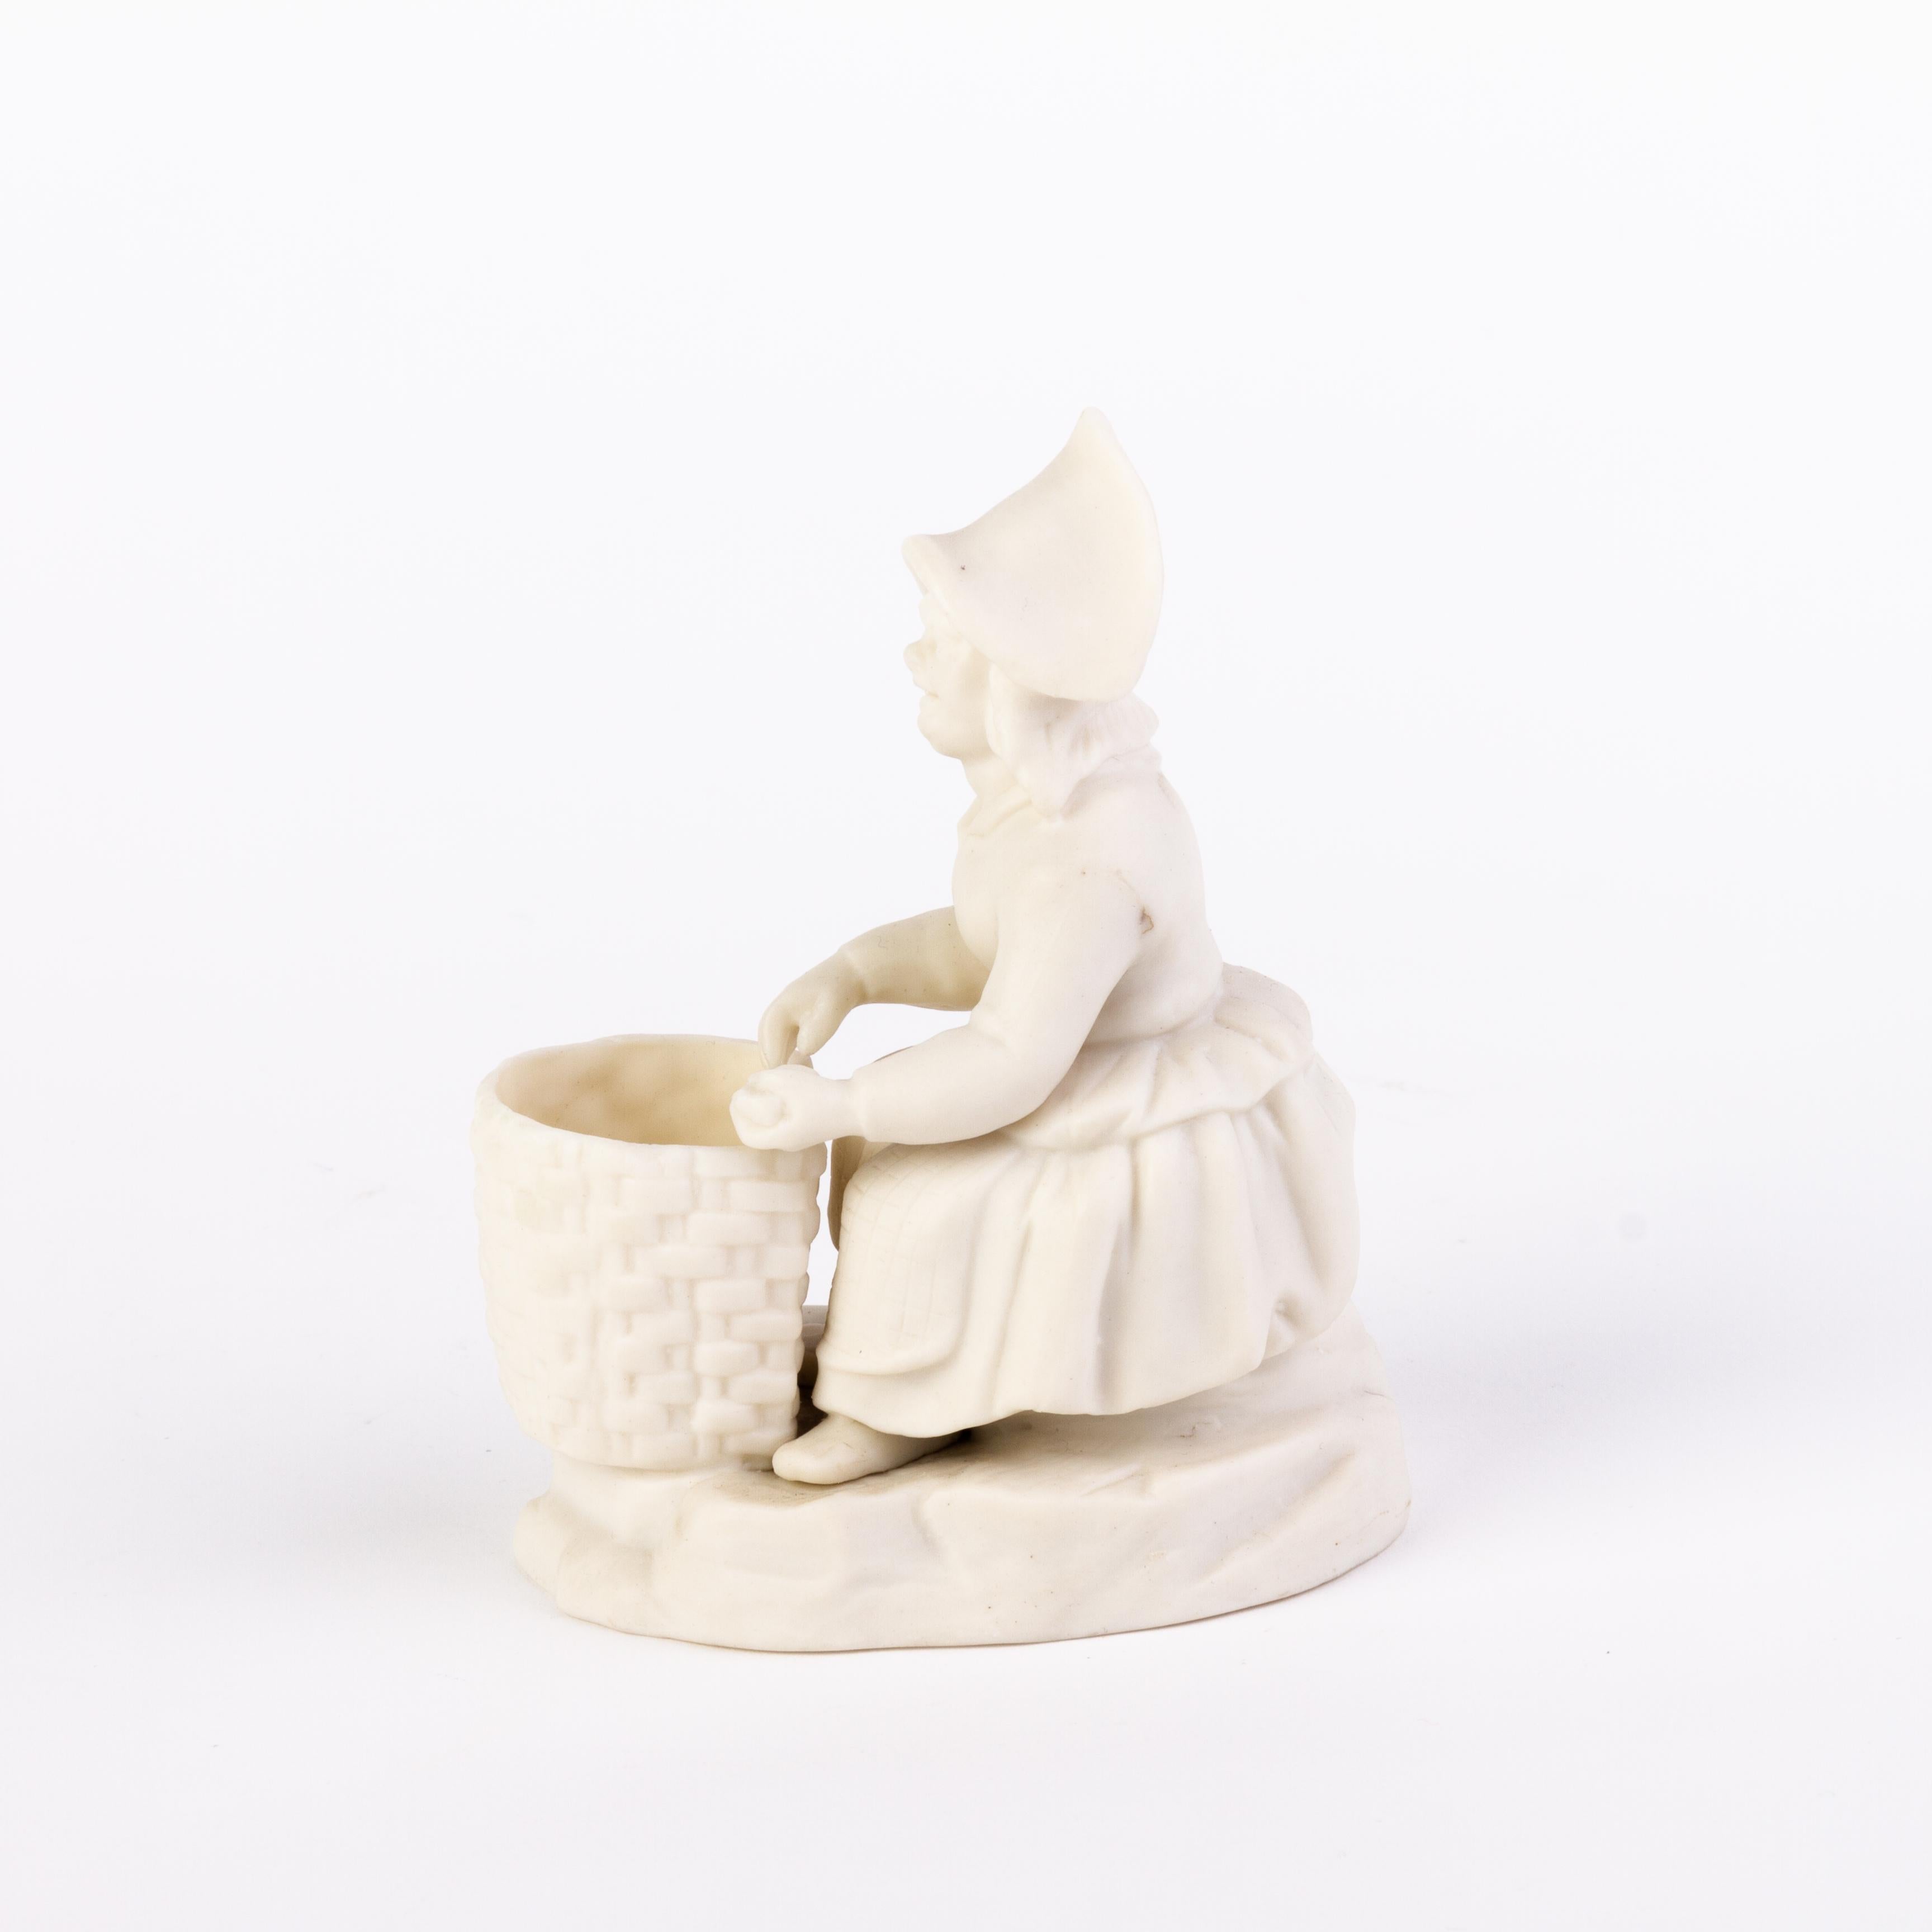 Porcelain Victorian English Copeland Parian Ware Statue Match Holder 19th Century For Sale